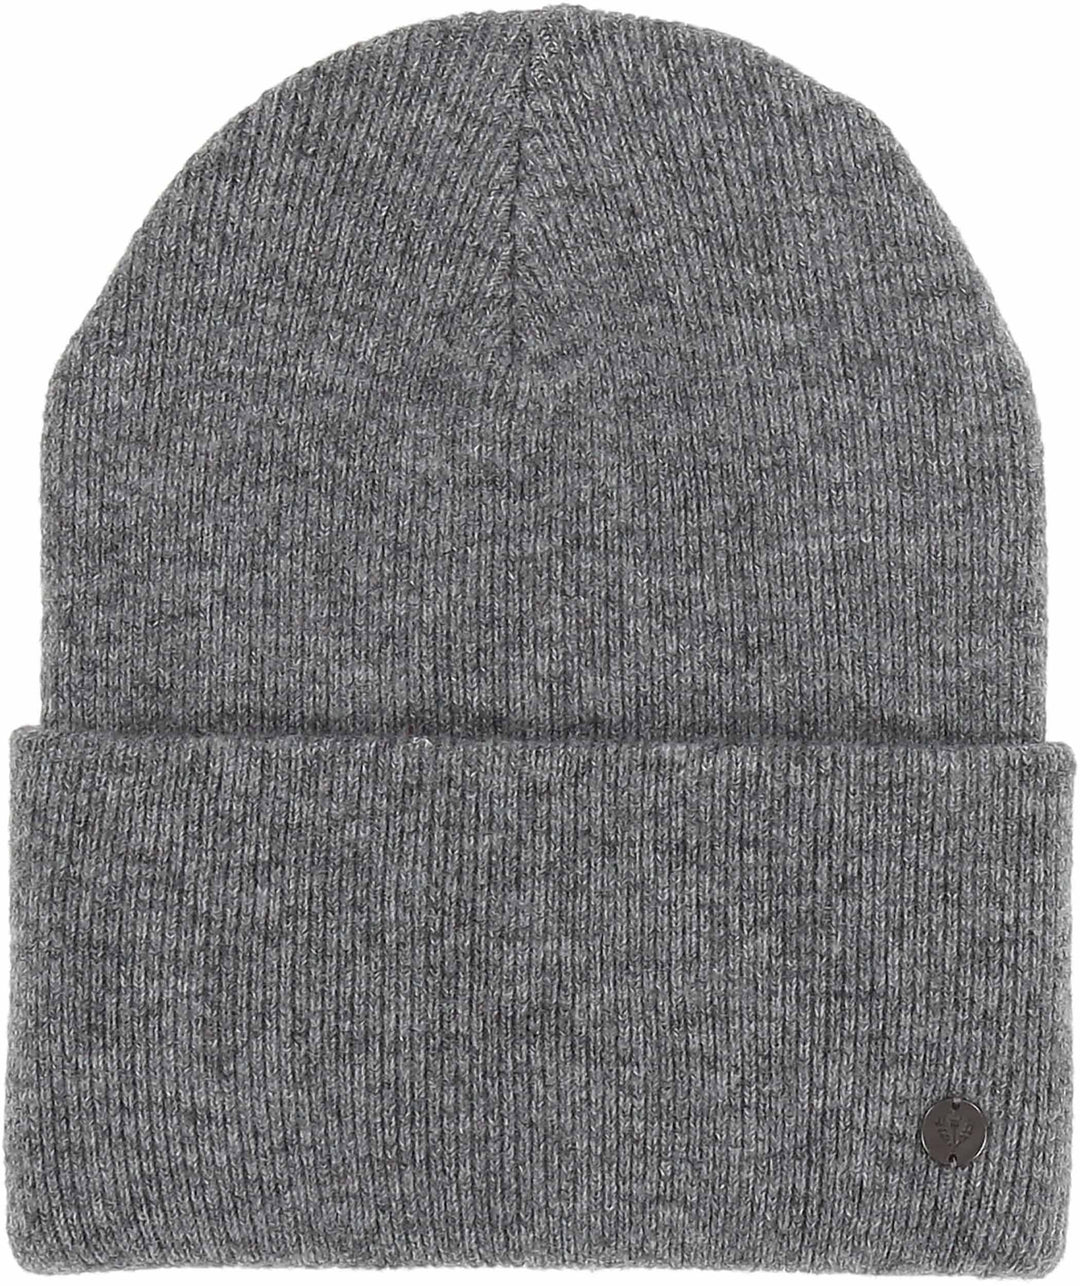 Sustainability Edition Jersey Knit Recycled Cuff Beanie